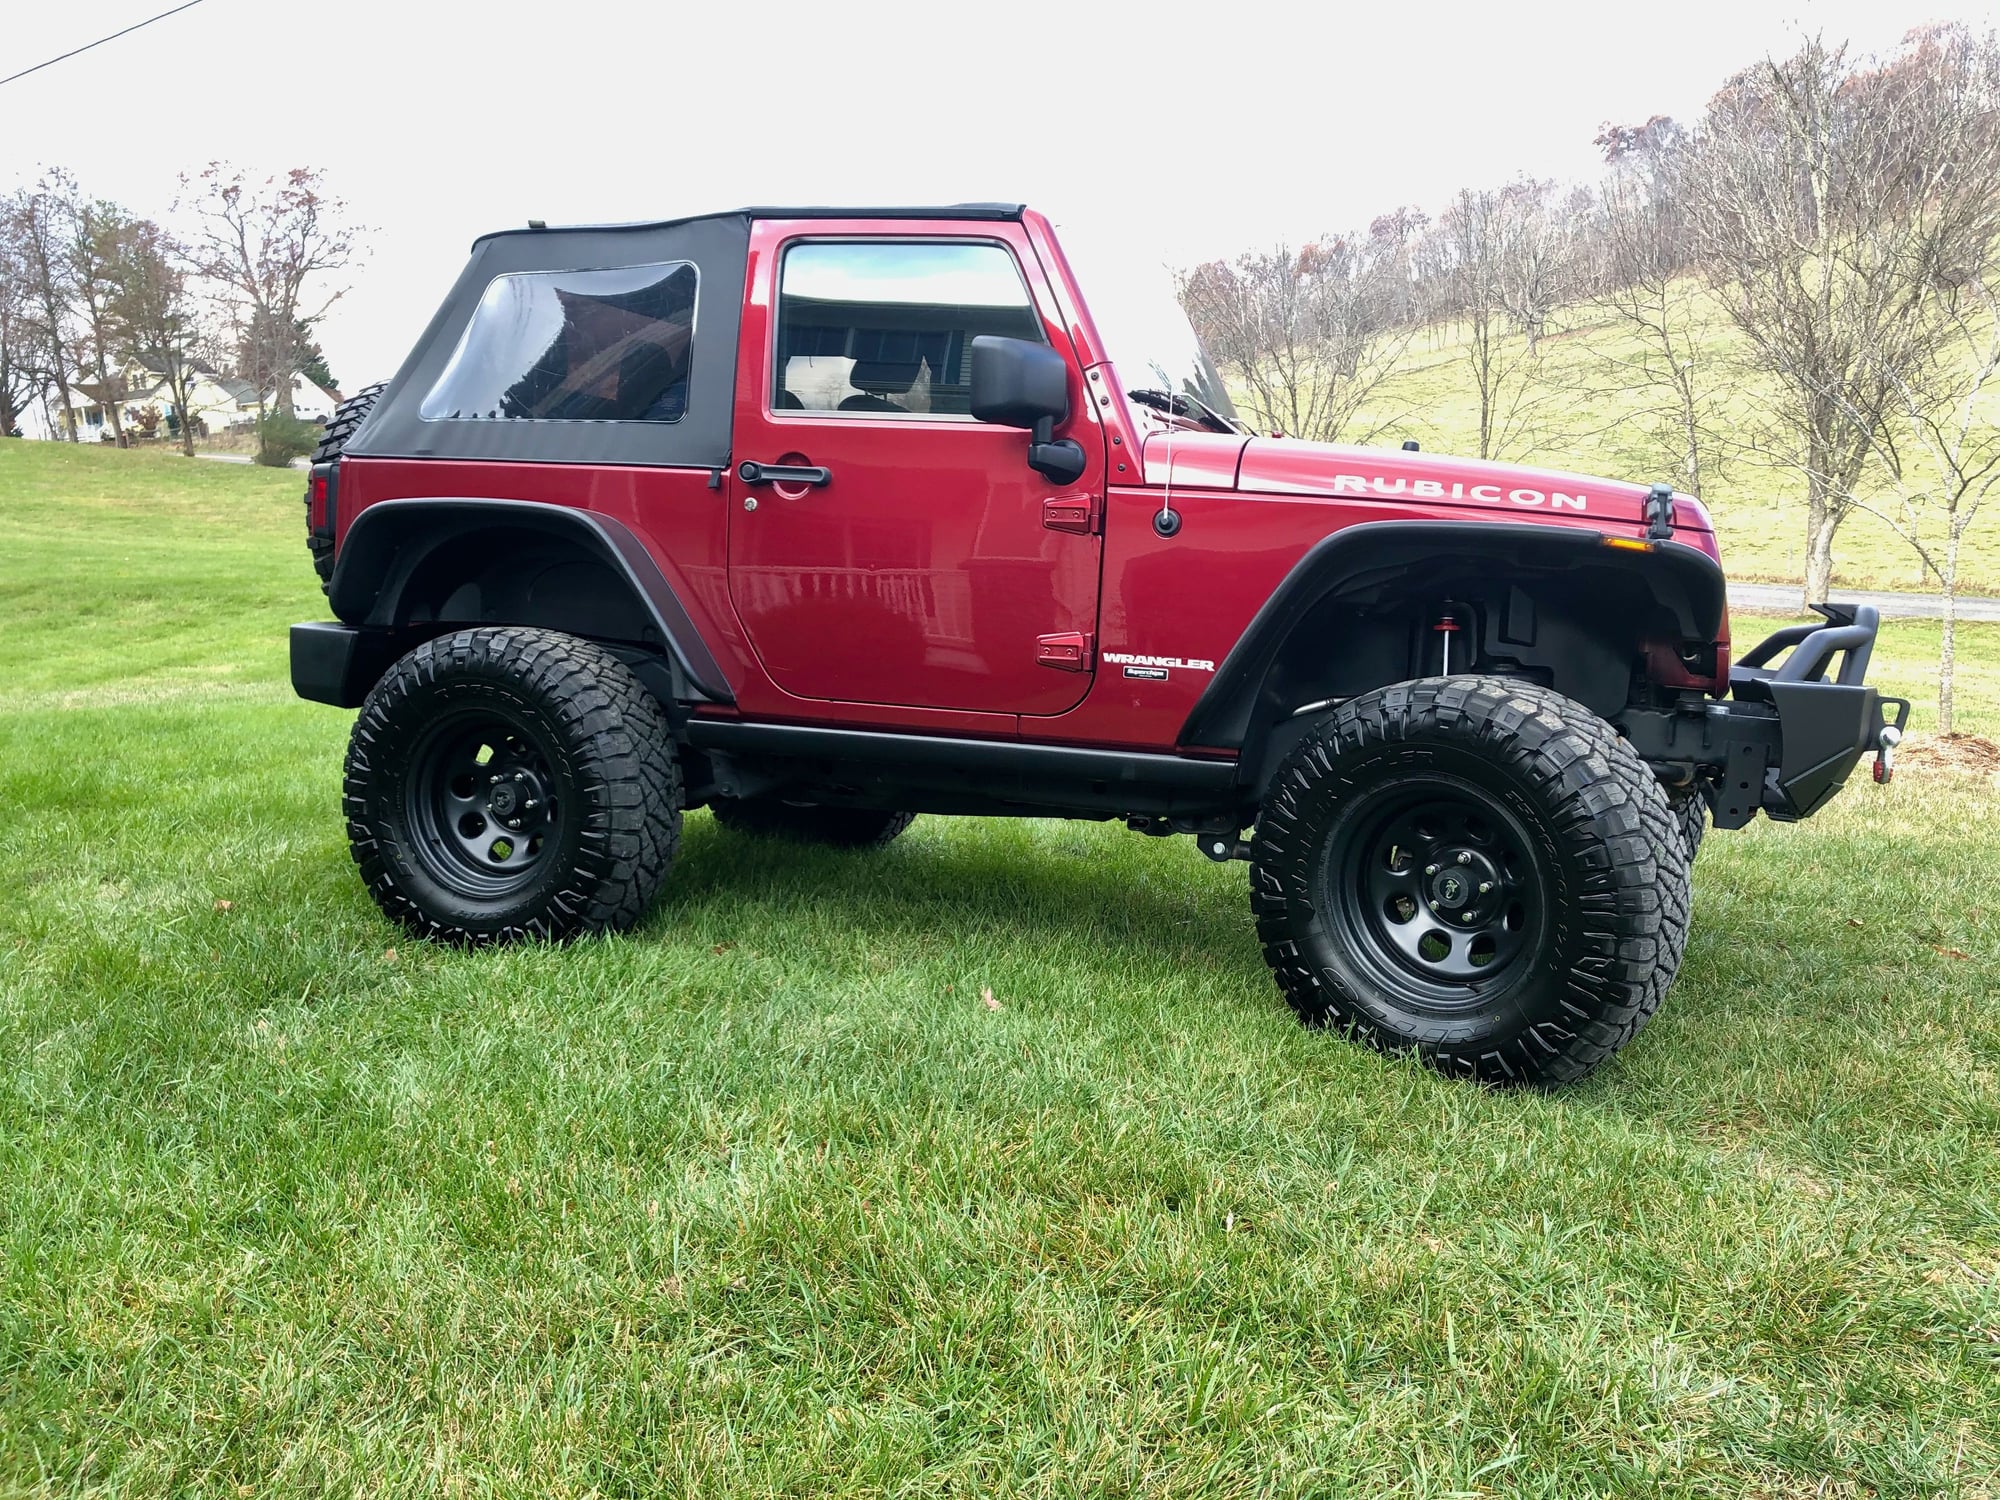 2012 Jeep Wrangler - 2012 Rubicon w SteerSmarts, MetalCloak and more... - Used - VIN 1C4HJWCGXCL19899 - 6 cyl - 4WD - Automatic - SUV - Red - Blacksburg, VA 24060, United States